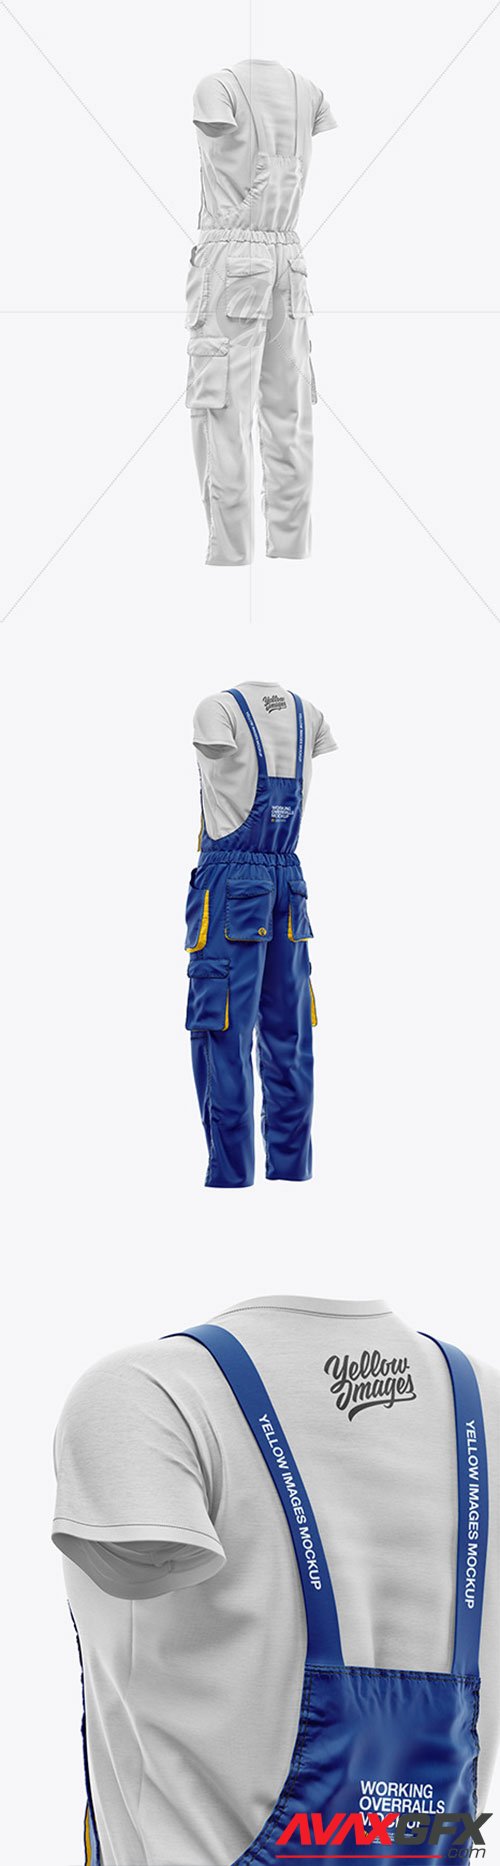 Download Working Overalls Mockup - Front Half Side View 58267 ...